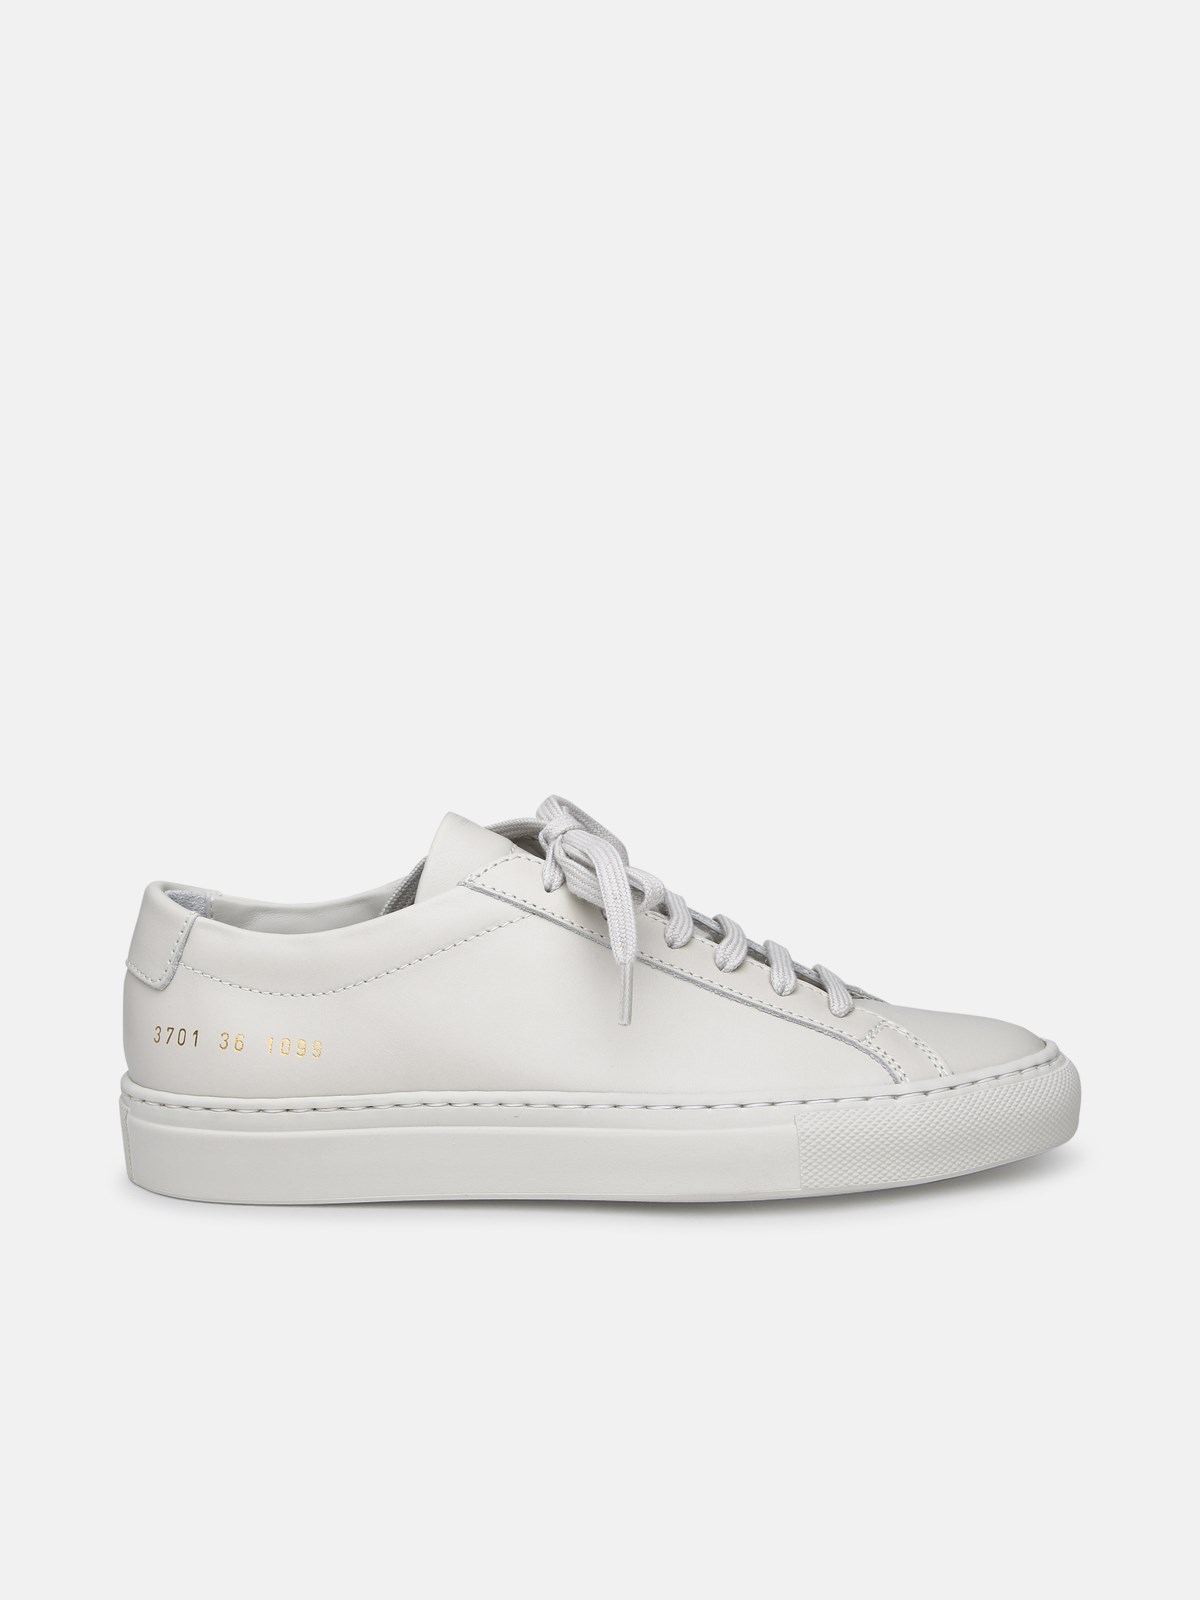 Common Projects Achilles Ivory Leather Sneakers In Beige